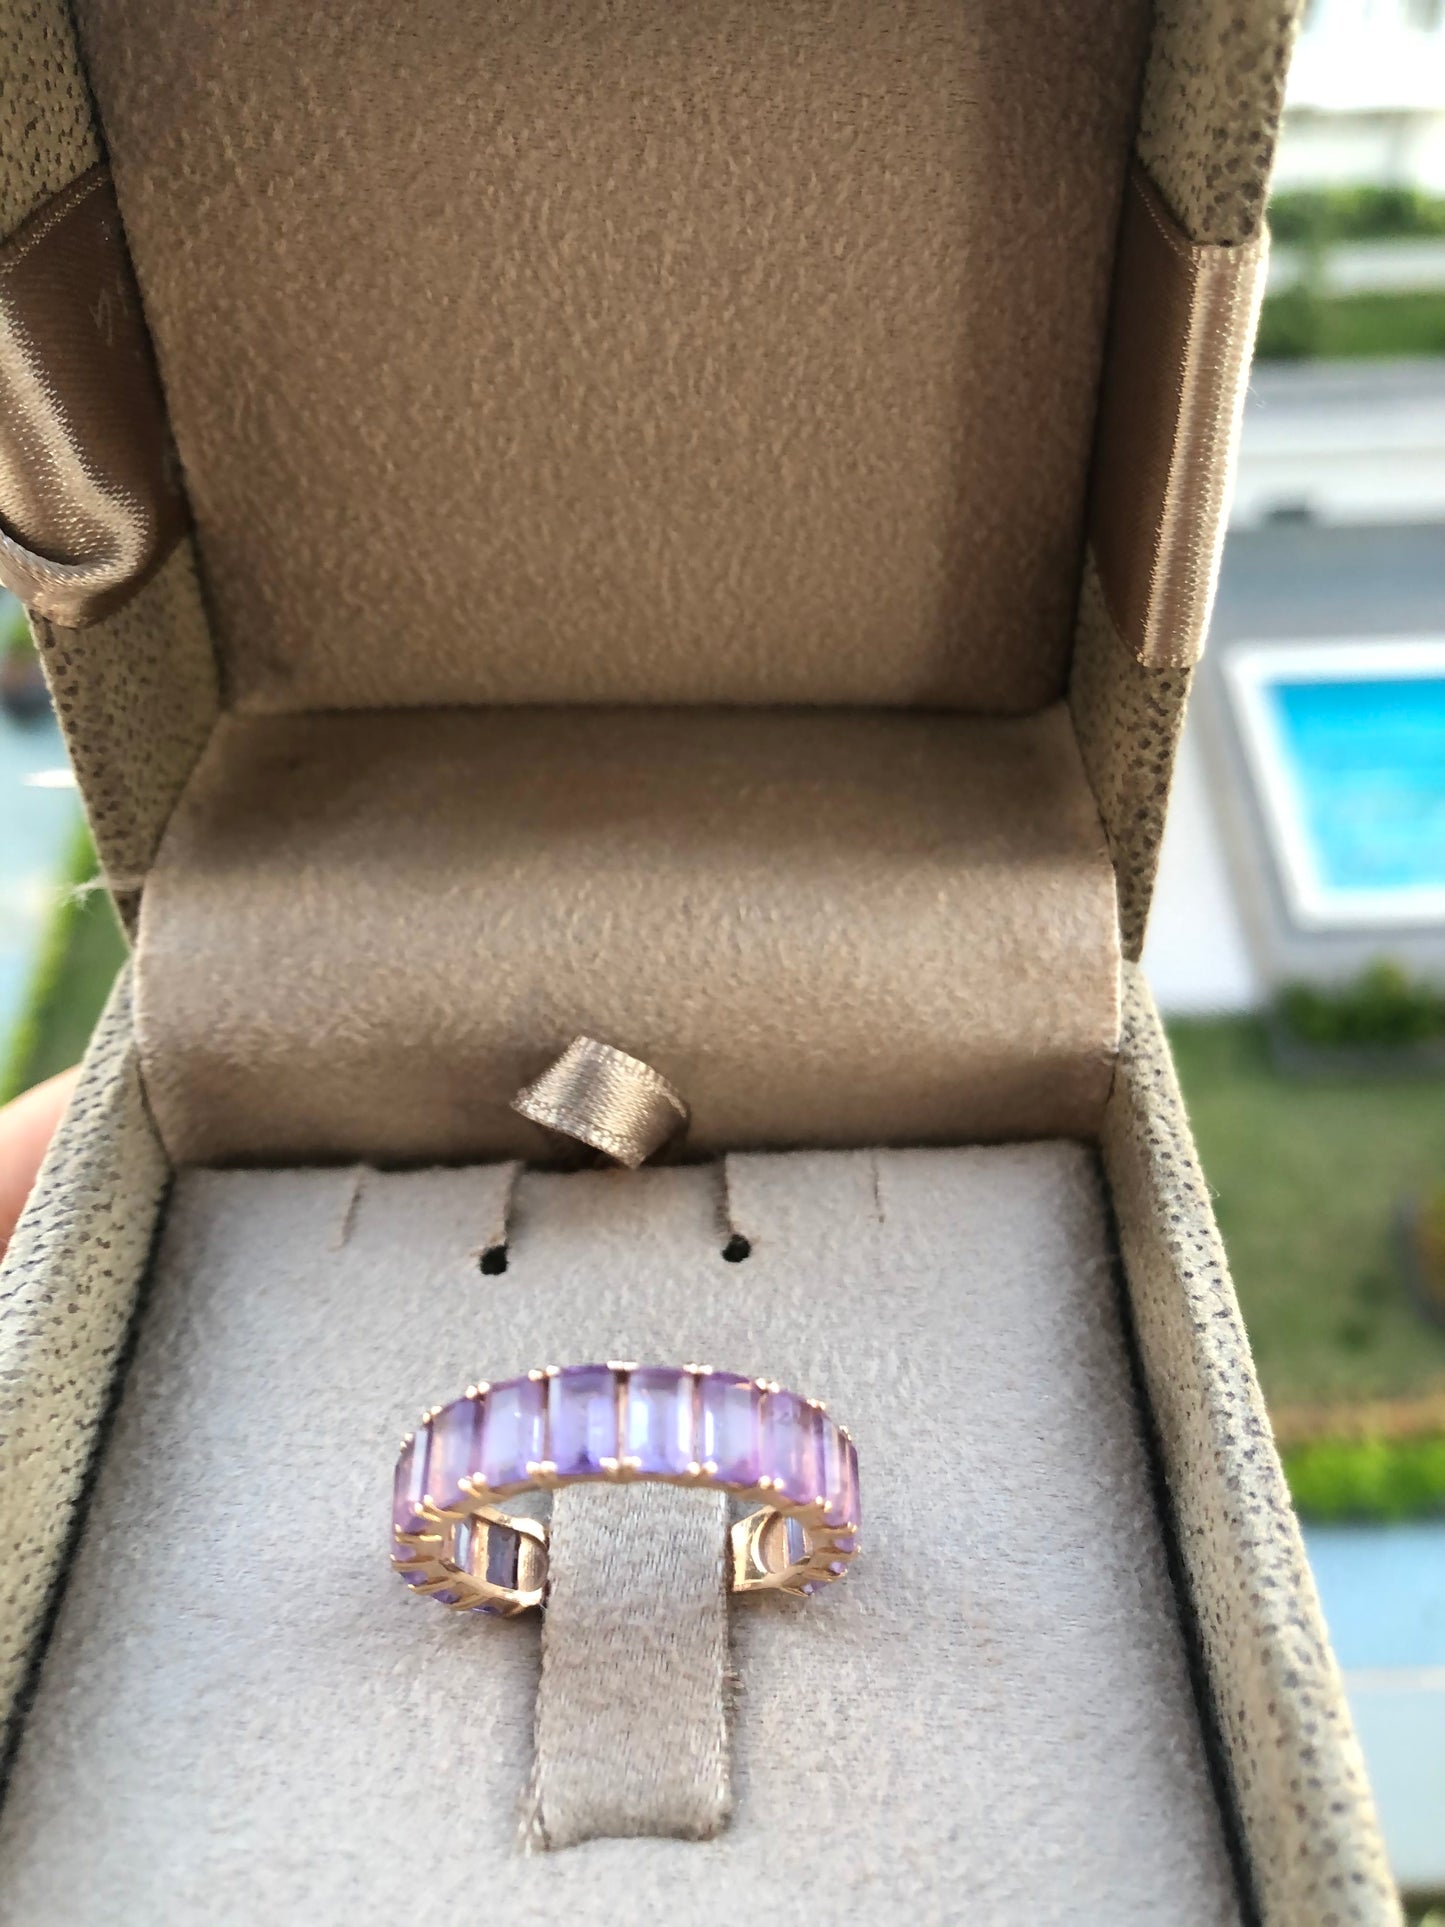 14k Gold Amethyst Infinity Ring, Amethyst Ring, Aquamarine Ring, Gold Infinity Ring, Amethyst Wedding Band, Gold Stacking Ring, Birthday Gift, Anniversary Gift, Gift For Her